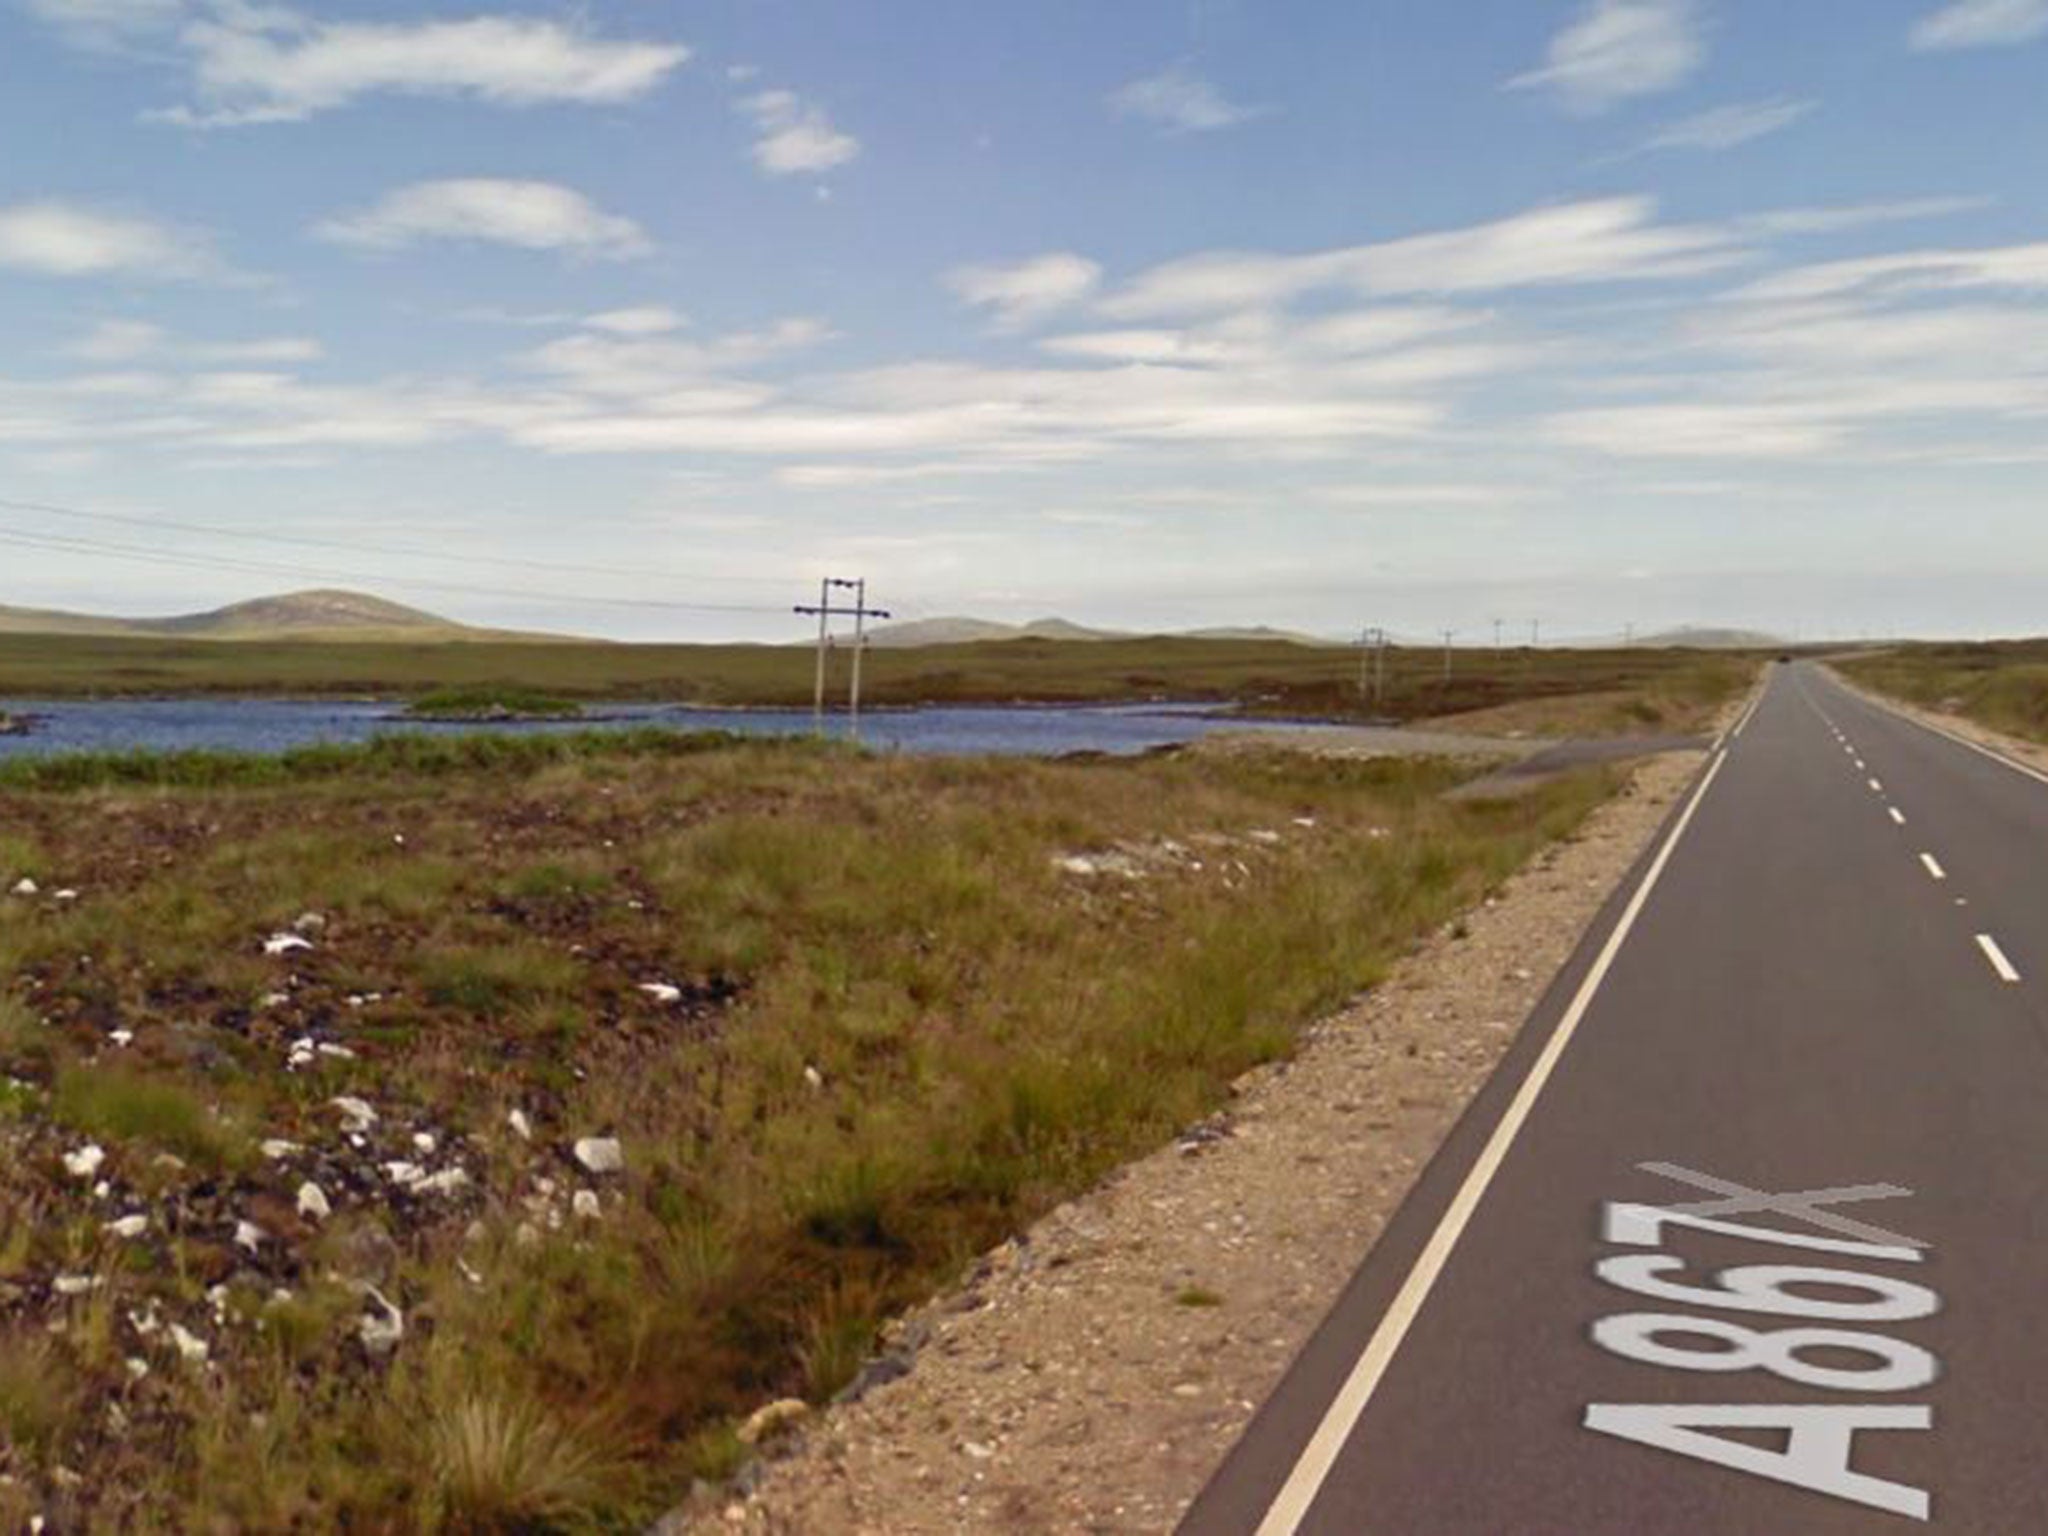 The AS350 Squirrel aircraft ditched in a loch between Lochmaddy and Clachan Na Luib on North Uist